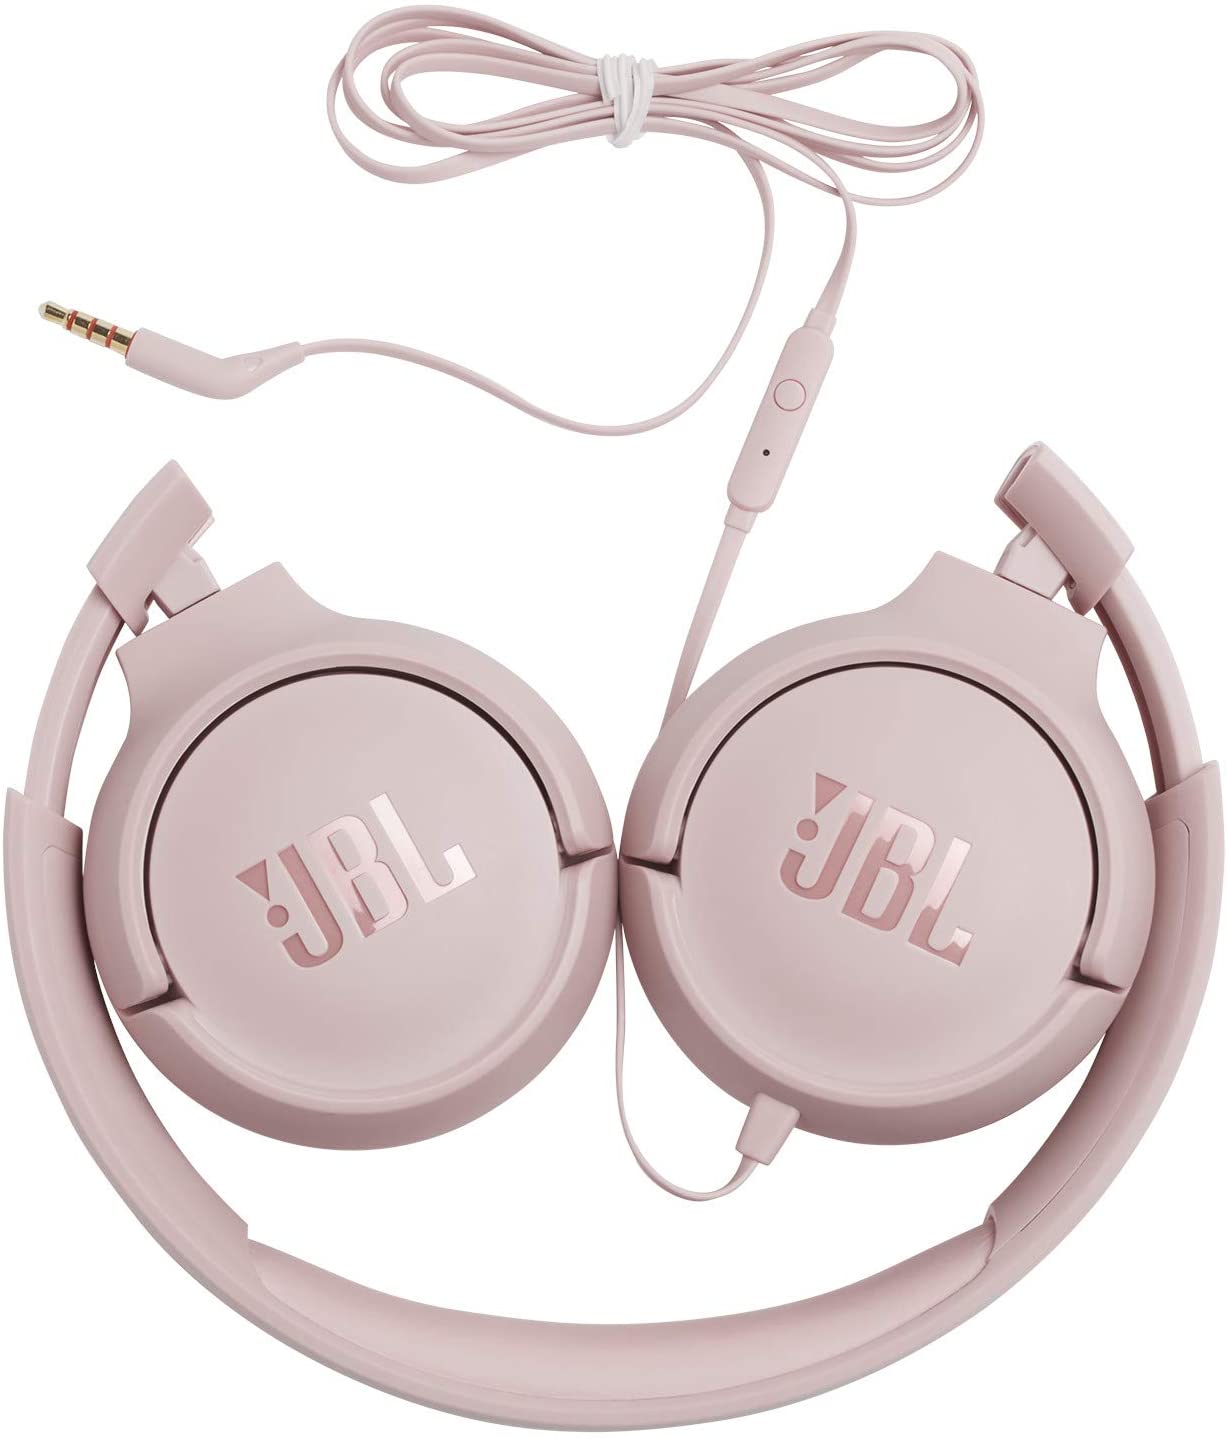 Con Wired Superstore Bass JBL Headphones JG Remote Sound, 500 – Tune Pure with In-Line